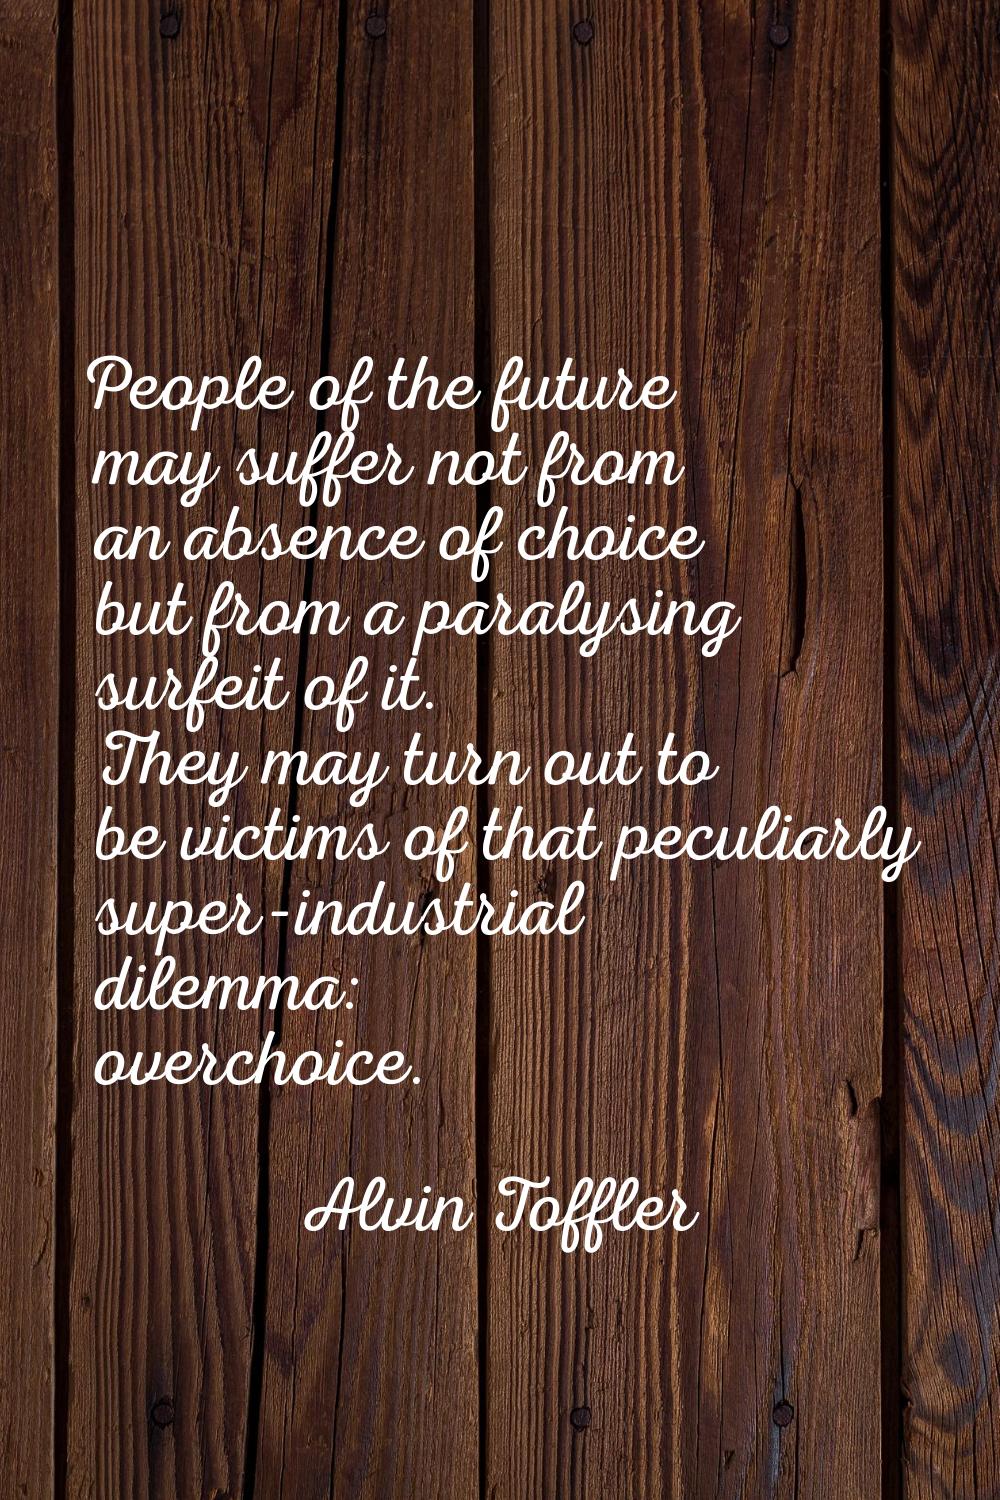 People of the future may suffer not from an absence of choice but from a paralysing surfeit of it. 